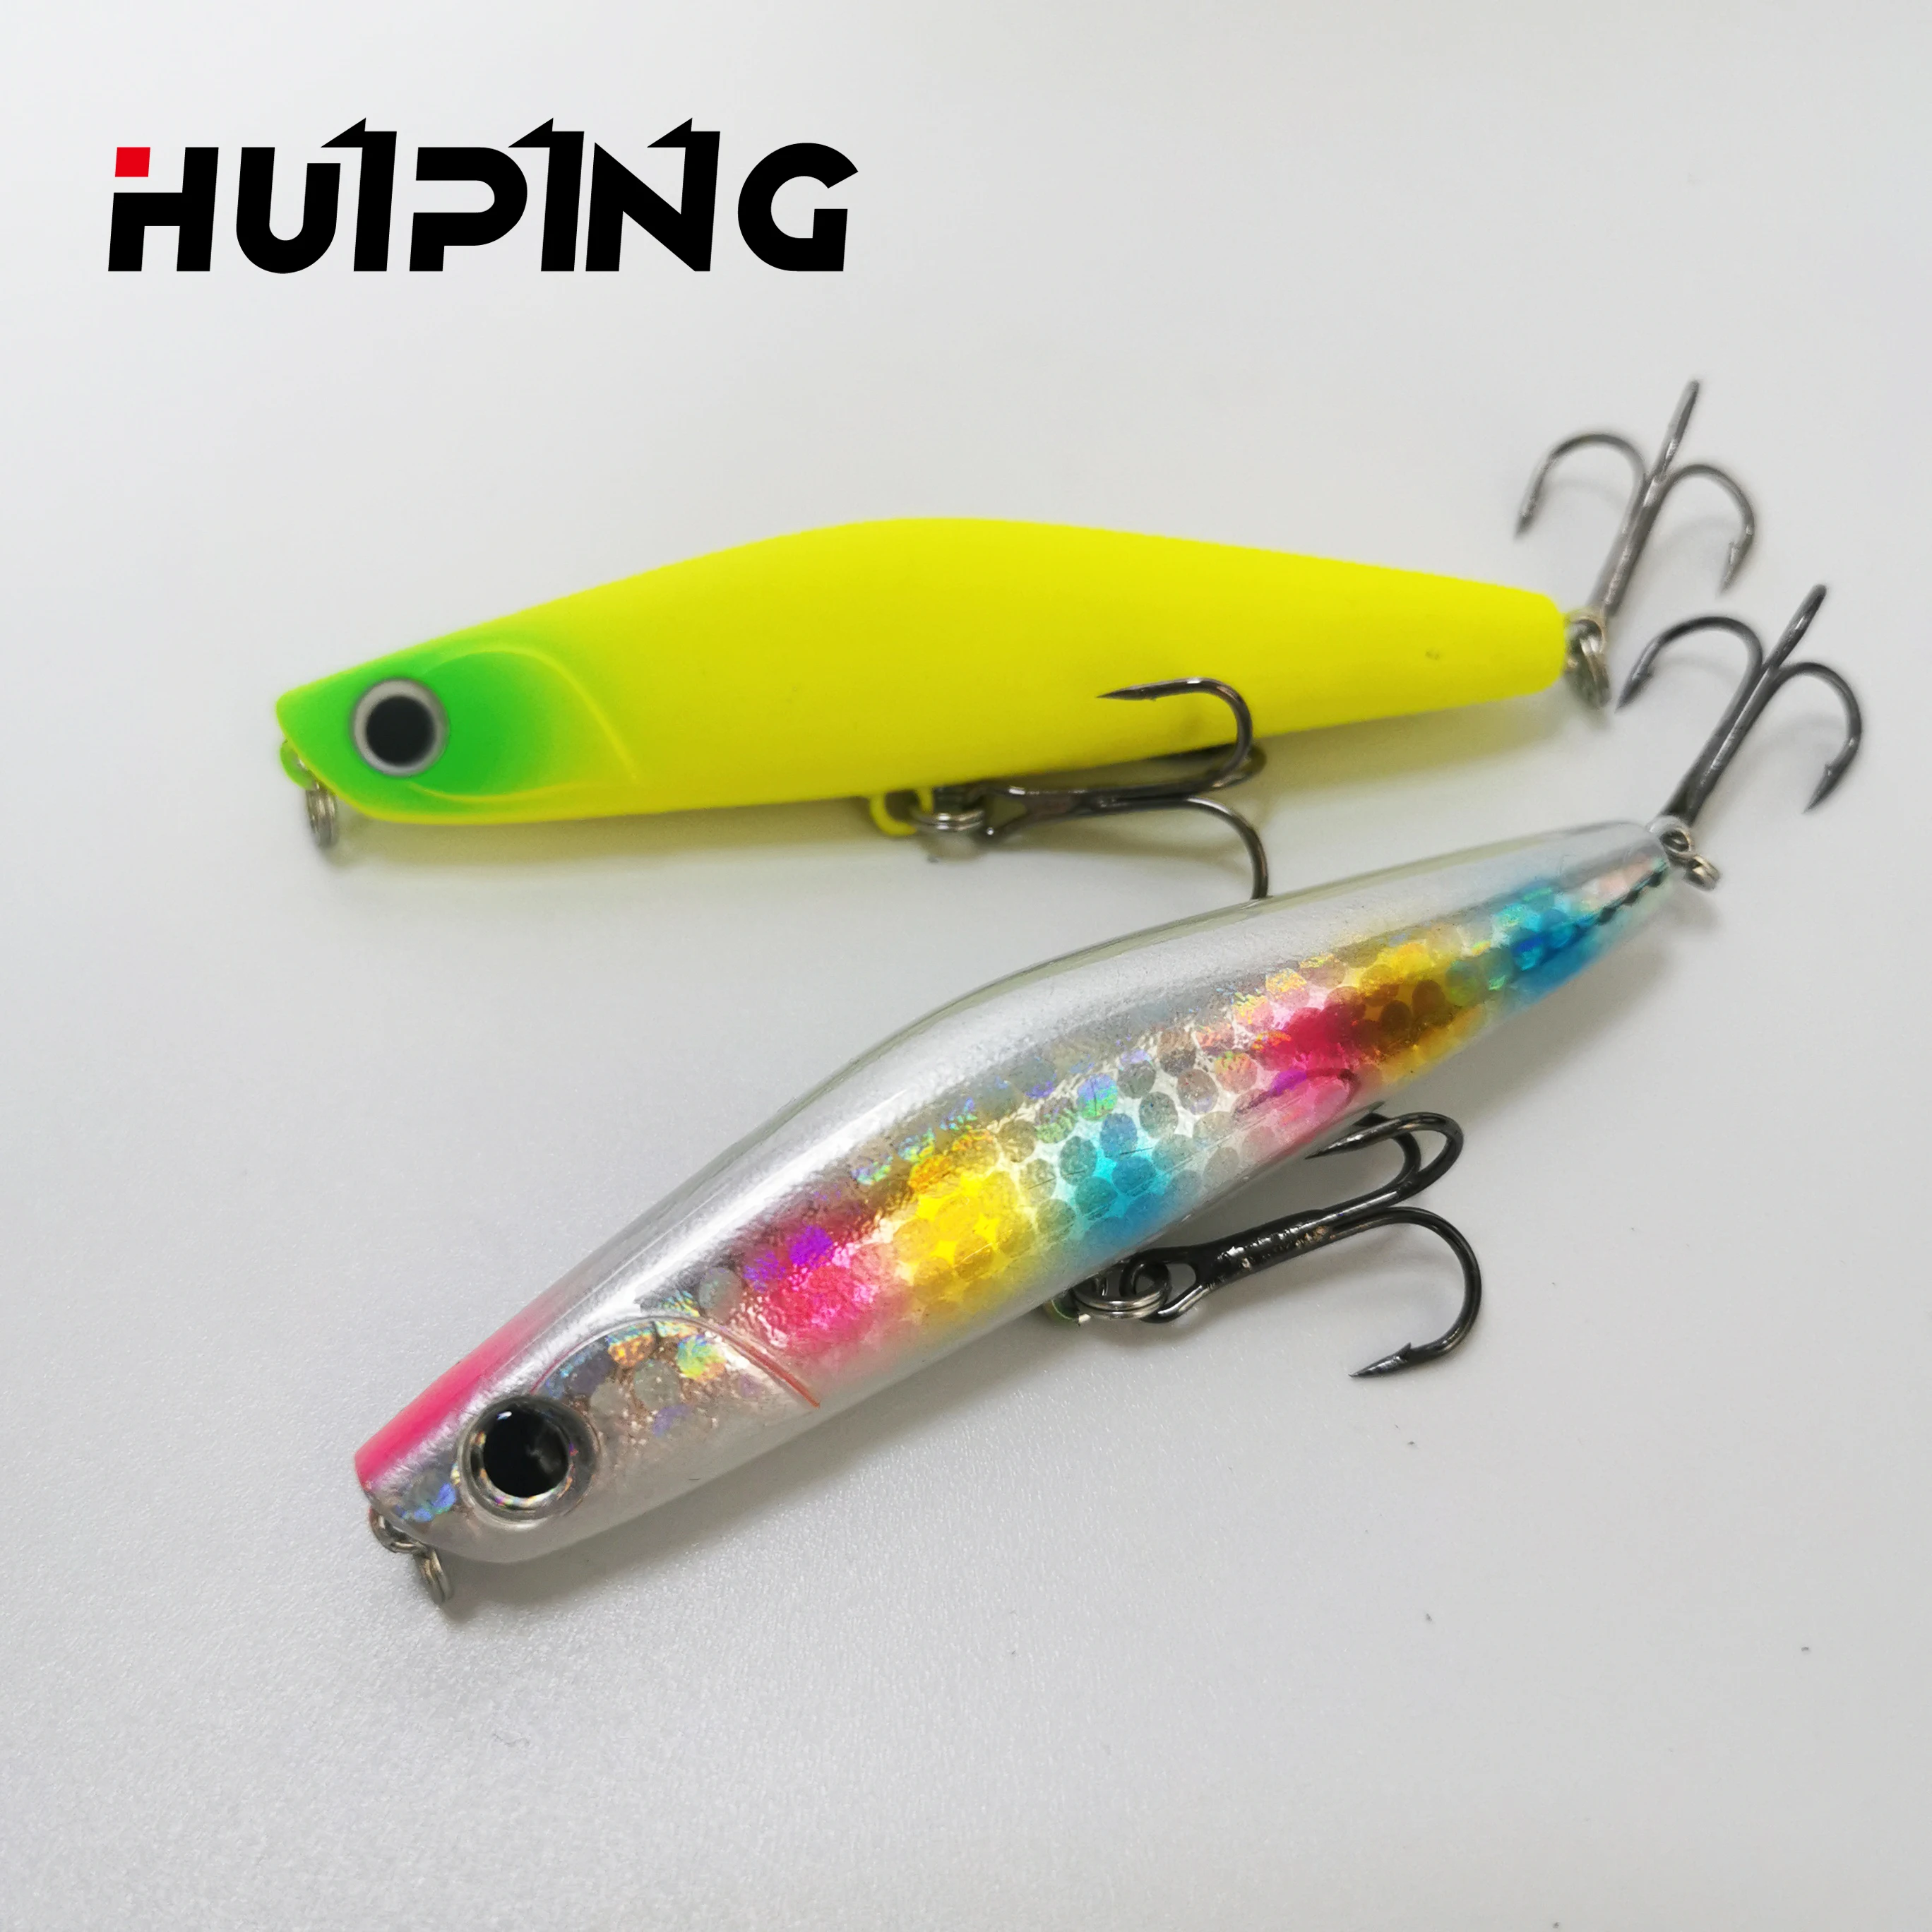 

HUIPING 18g 80mm Pesca fishing lure Pencil Lure Hard Plastic sinking Fishing Lures Artificial Fishing Bait, 8 colors